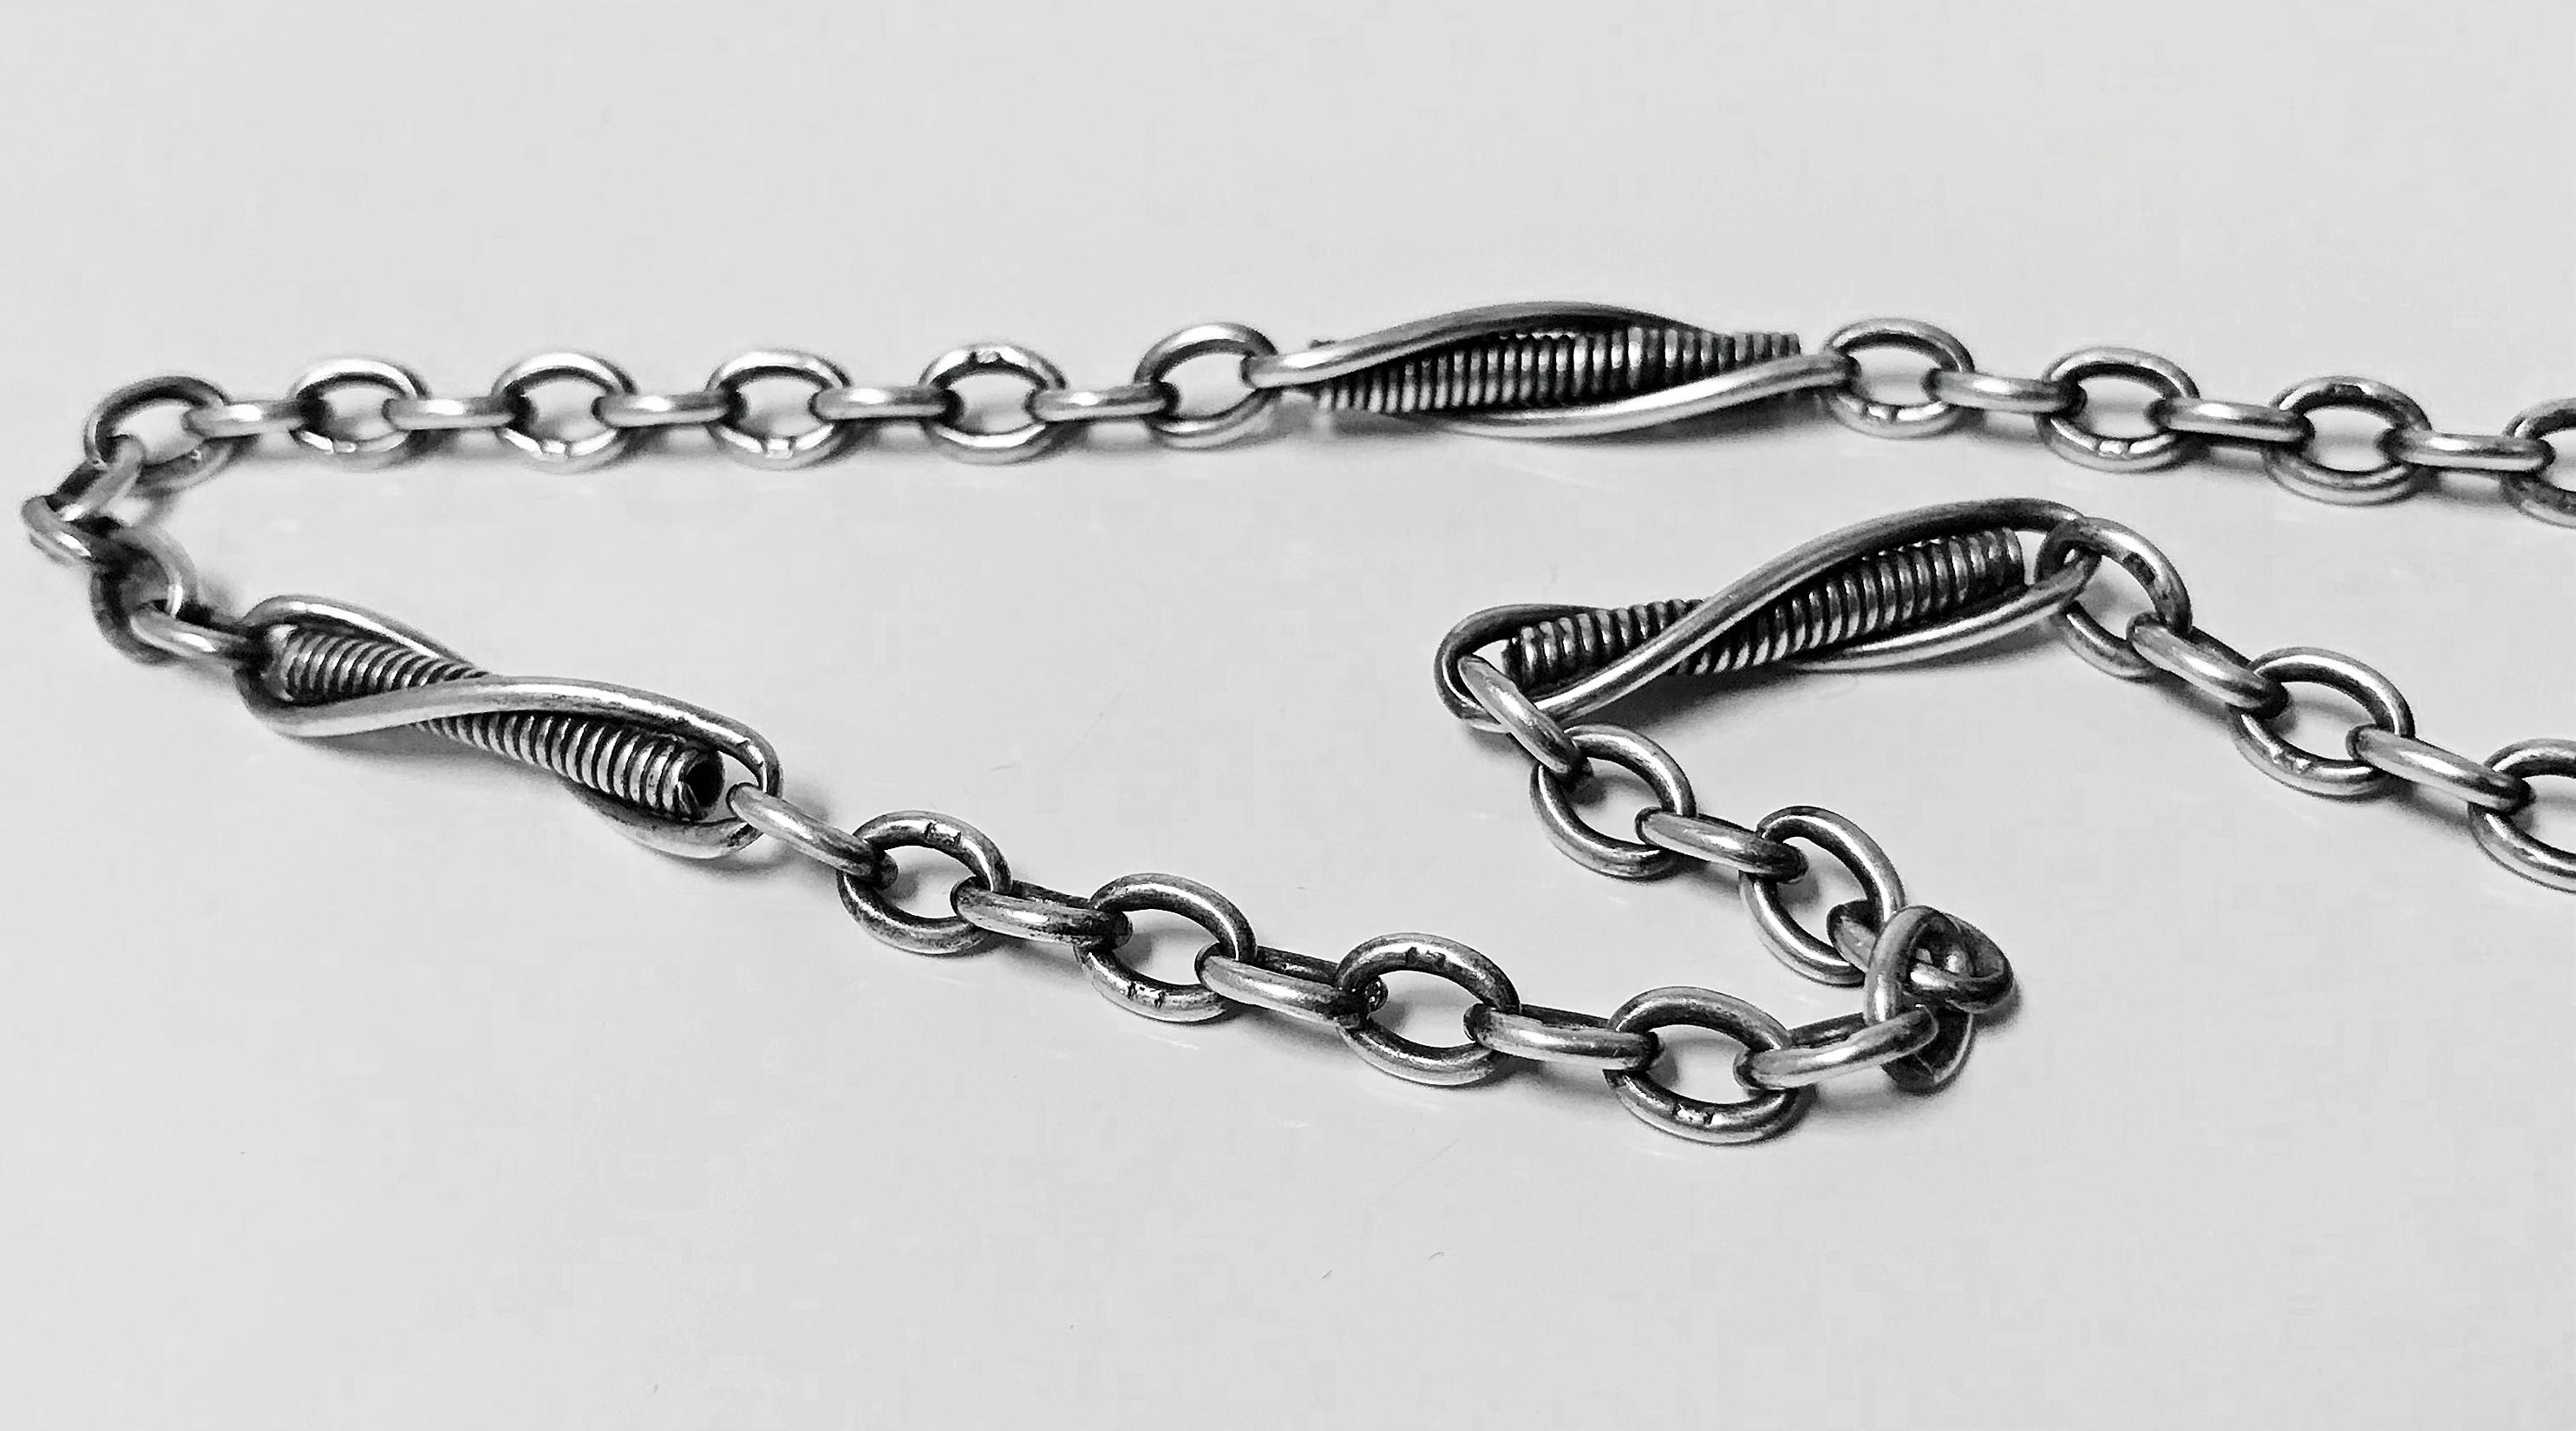 Antique English Silver Albert Watch Chain, Birmingham 1908 Henry Pope. Oval intertwining links interspaced with spiral twist groove design sections. T bar, two swivels and all links hallmarked. Length: 15.5 inches. Item Weight: 24 grams.